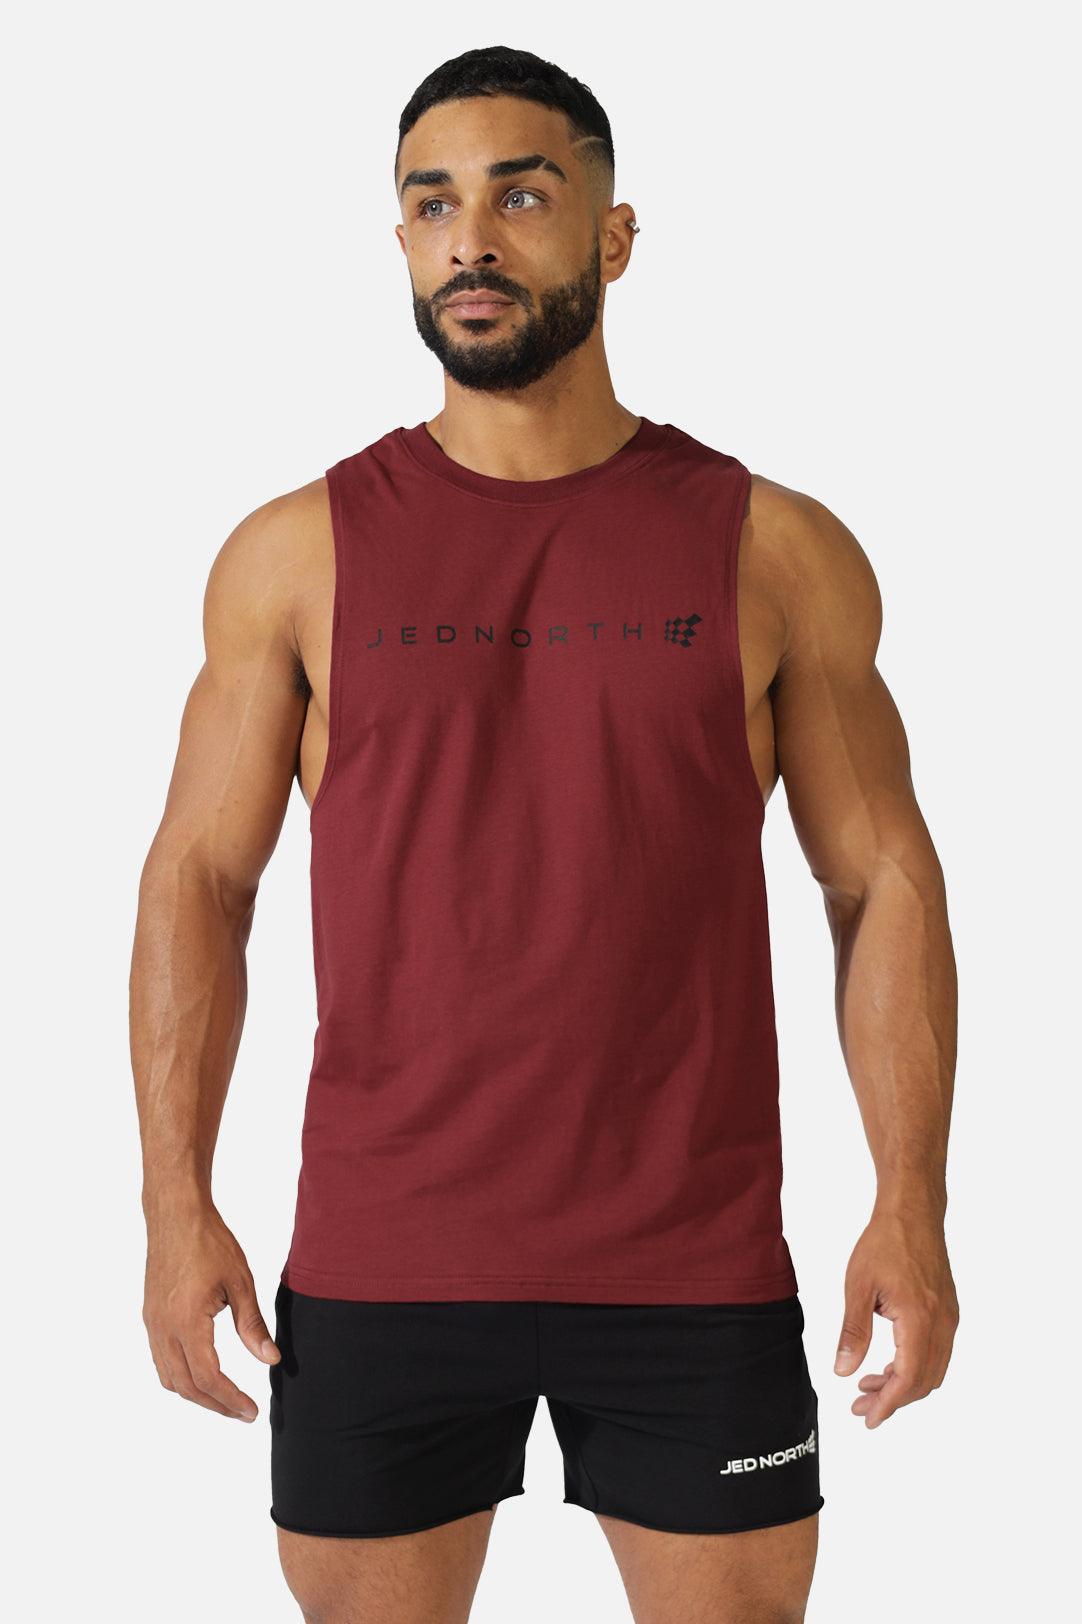 Bodybuilding Gym T-Shirt Mens Workout Shirt Muscle Tee Men Fitness Clothing  Tops